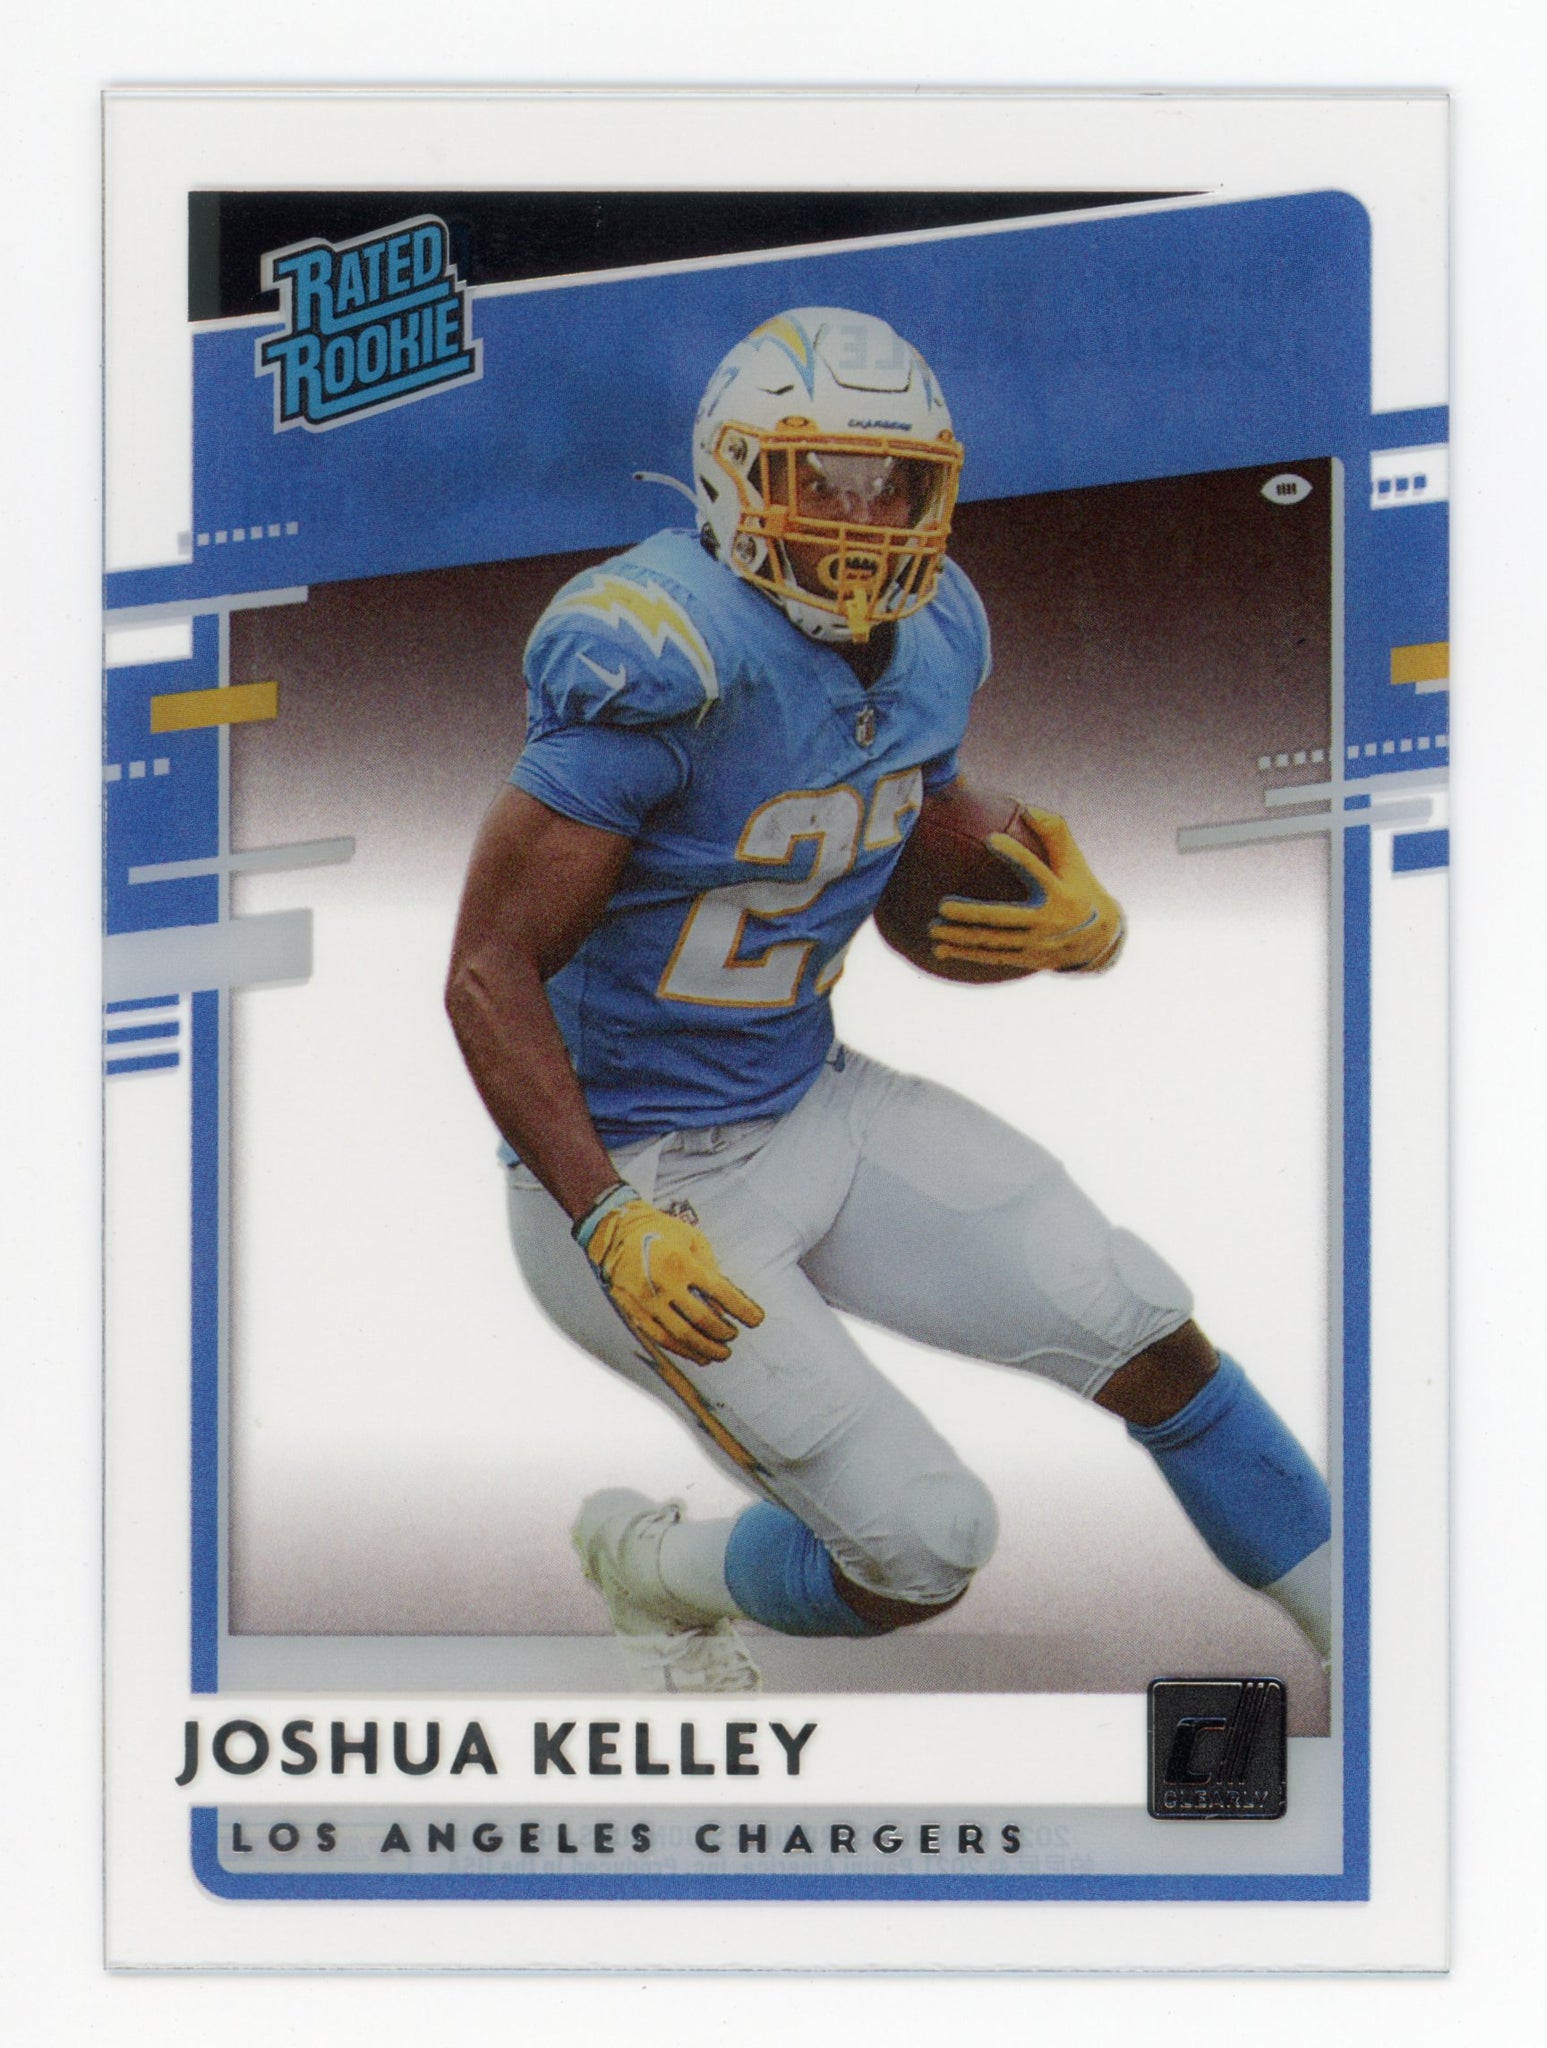 Joshua Kelley Panini 2020 Rated Rookie ClearlyLos Angeles Chargers #RR-JOK